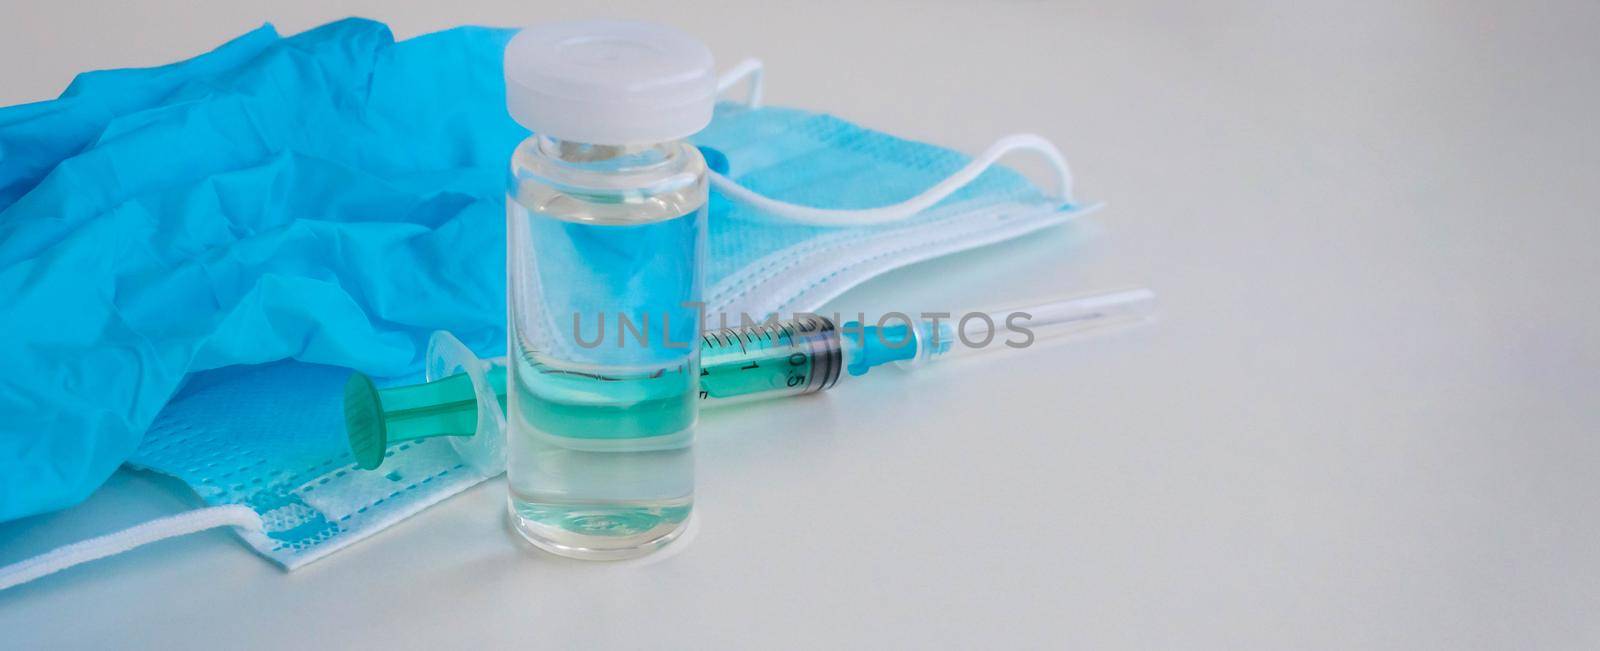 A syringe, gloves, mask, and a bottle of vaccine stand on a blue background. For the prevention, immunization and treatment of coronavirus infection. The concept of medicine and health care.